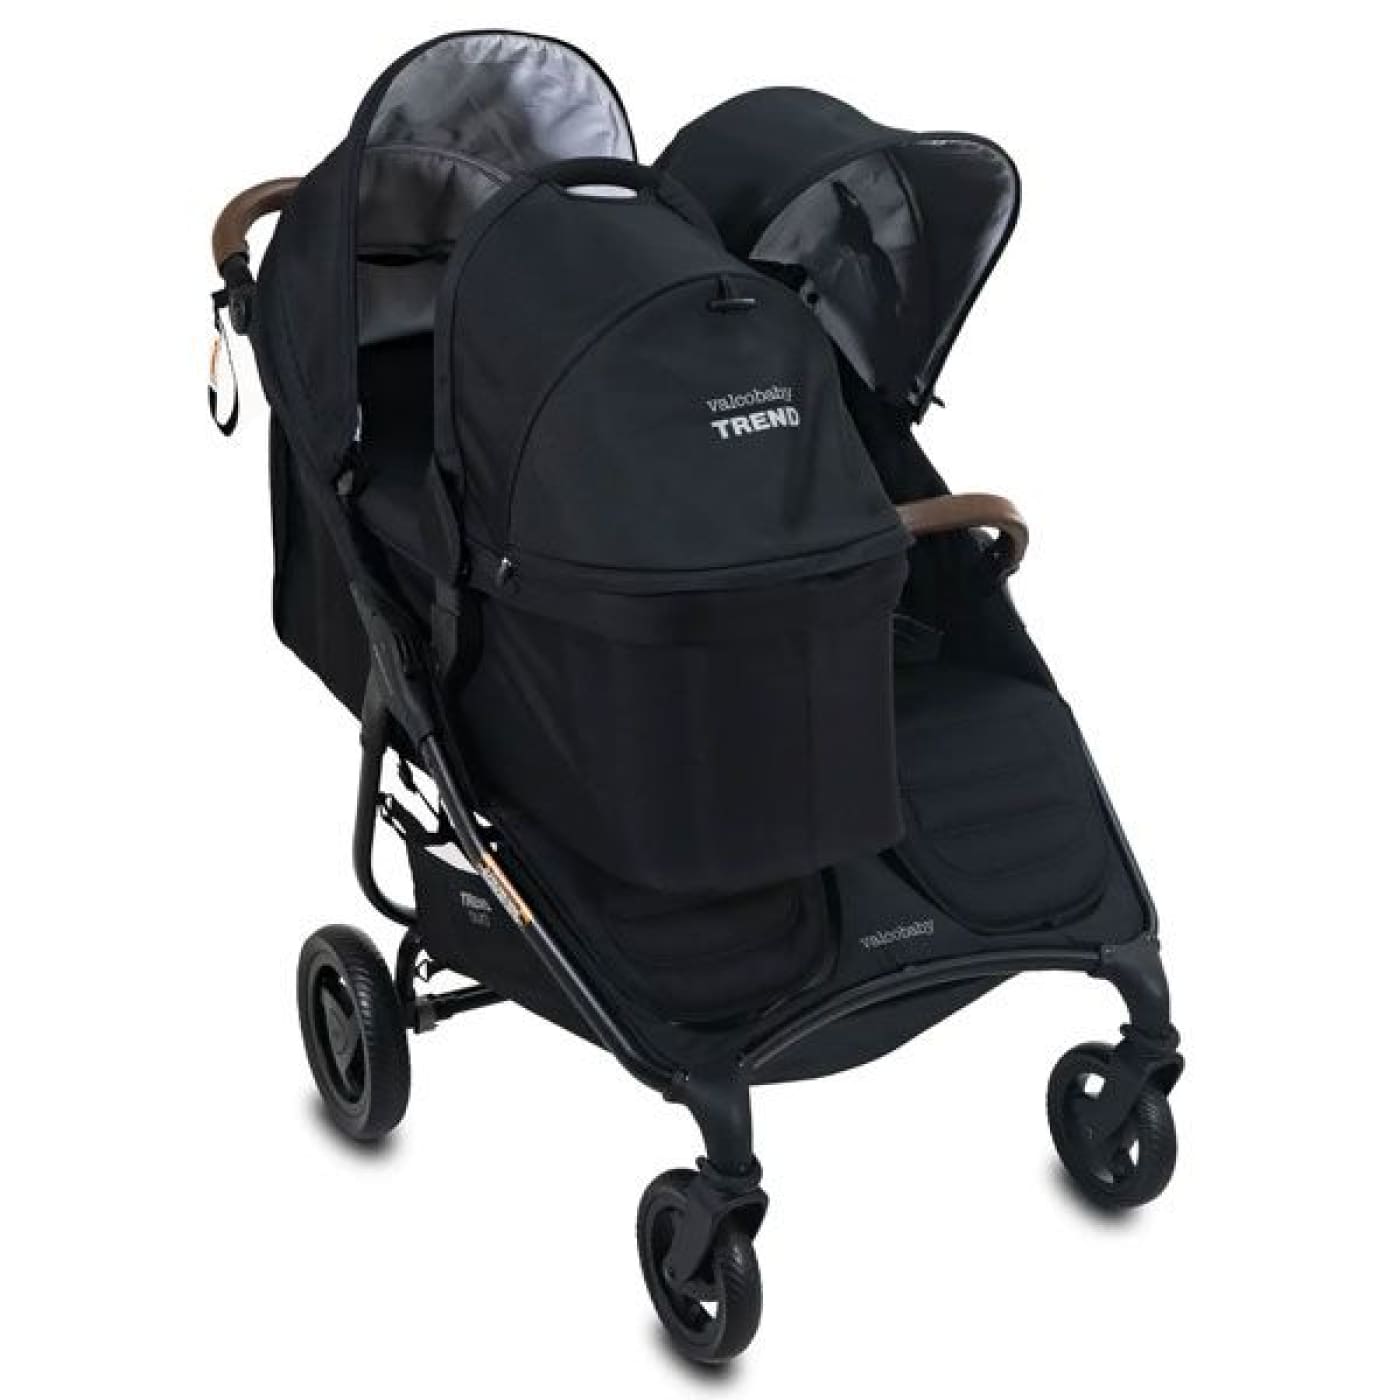 Valco Baby Bassinet for Snap Duo Trend (Includes Adaptor) - Ash Black - Ash Black - PRAMS & STROLLERS - BASS/CARRY COTS/STANDS